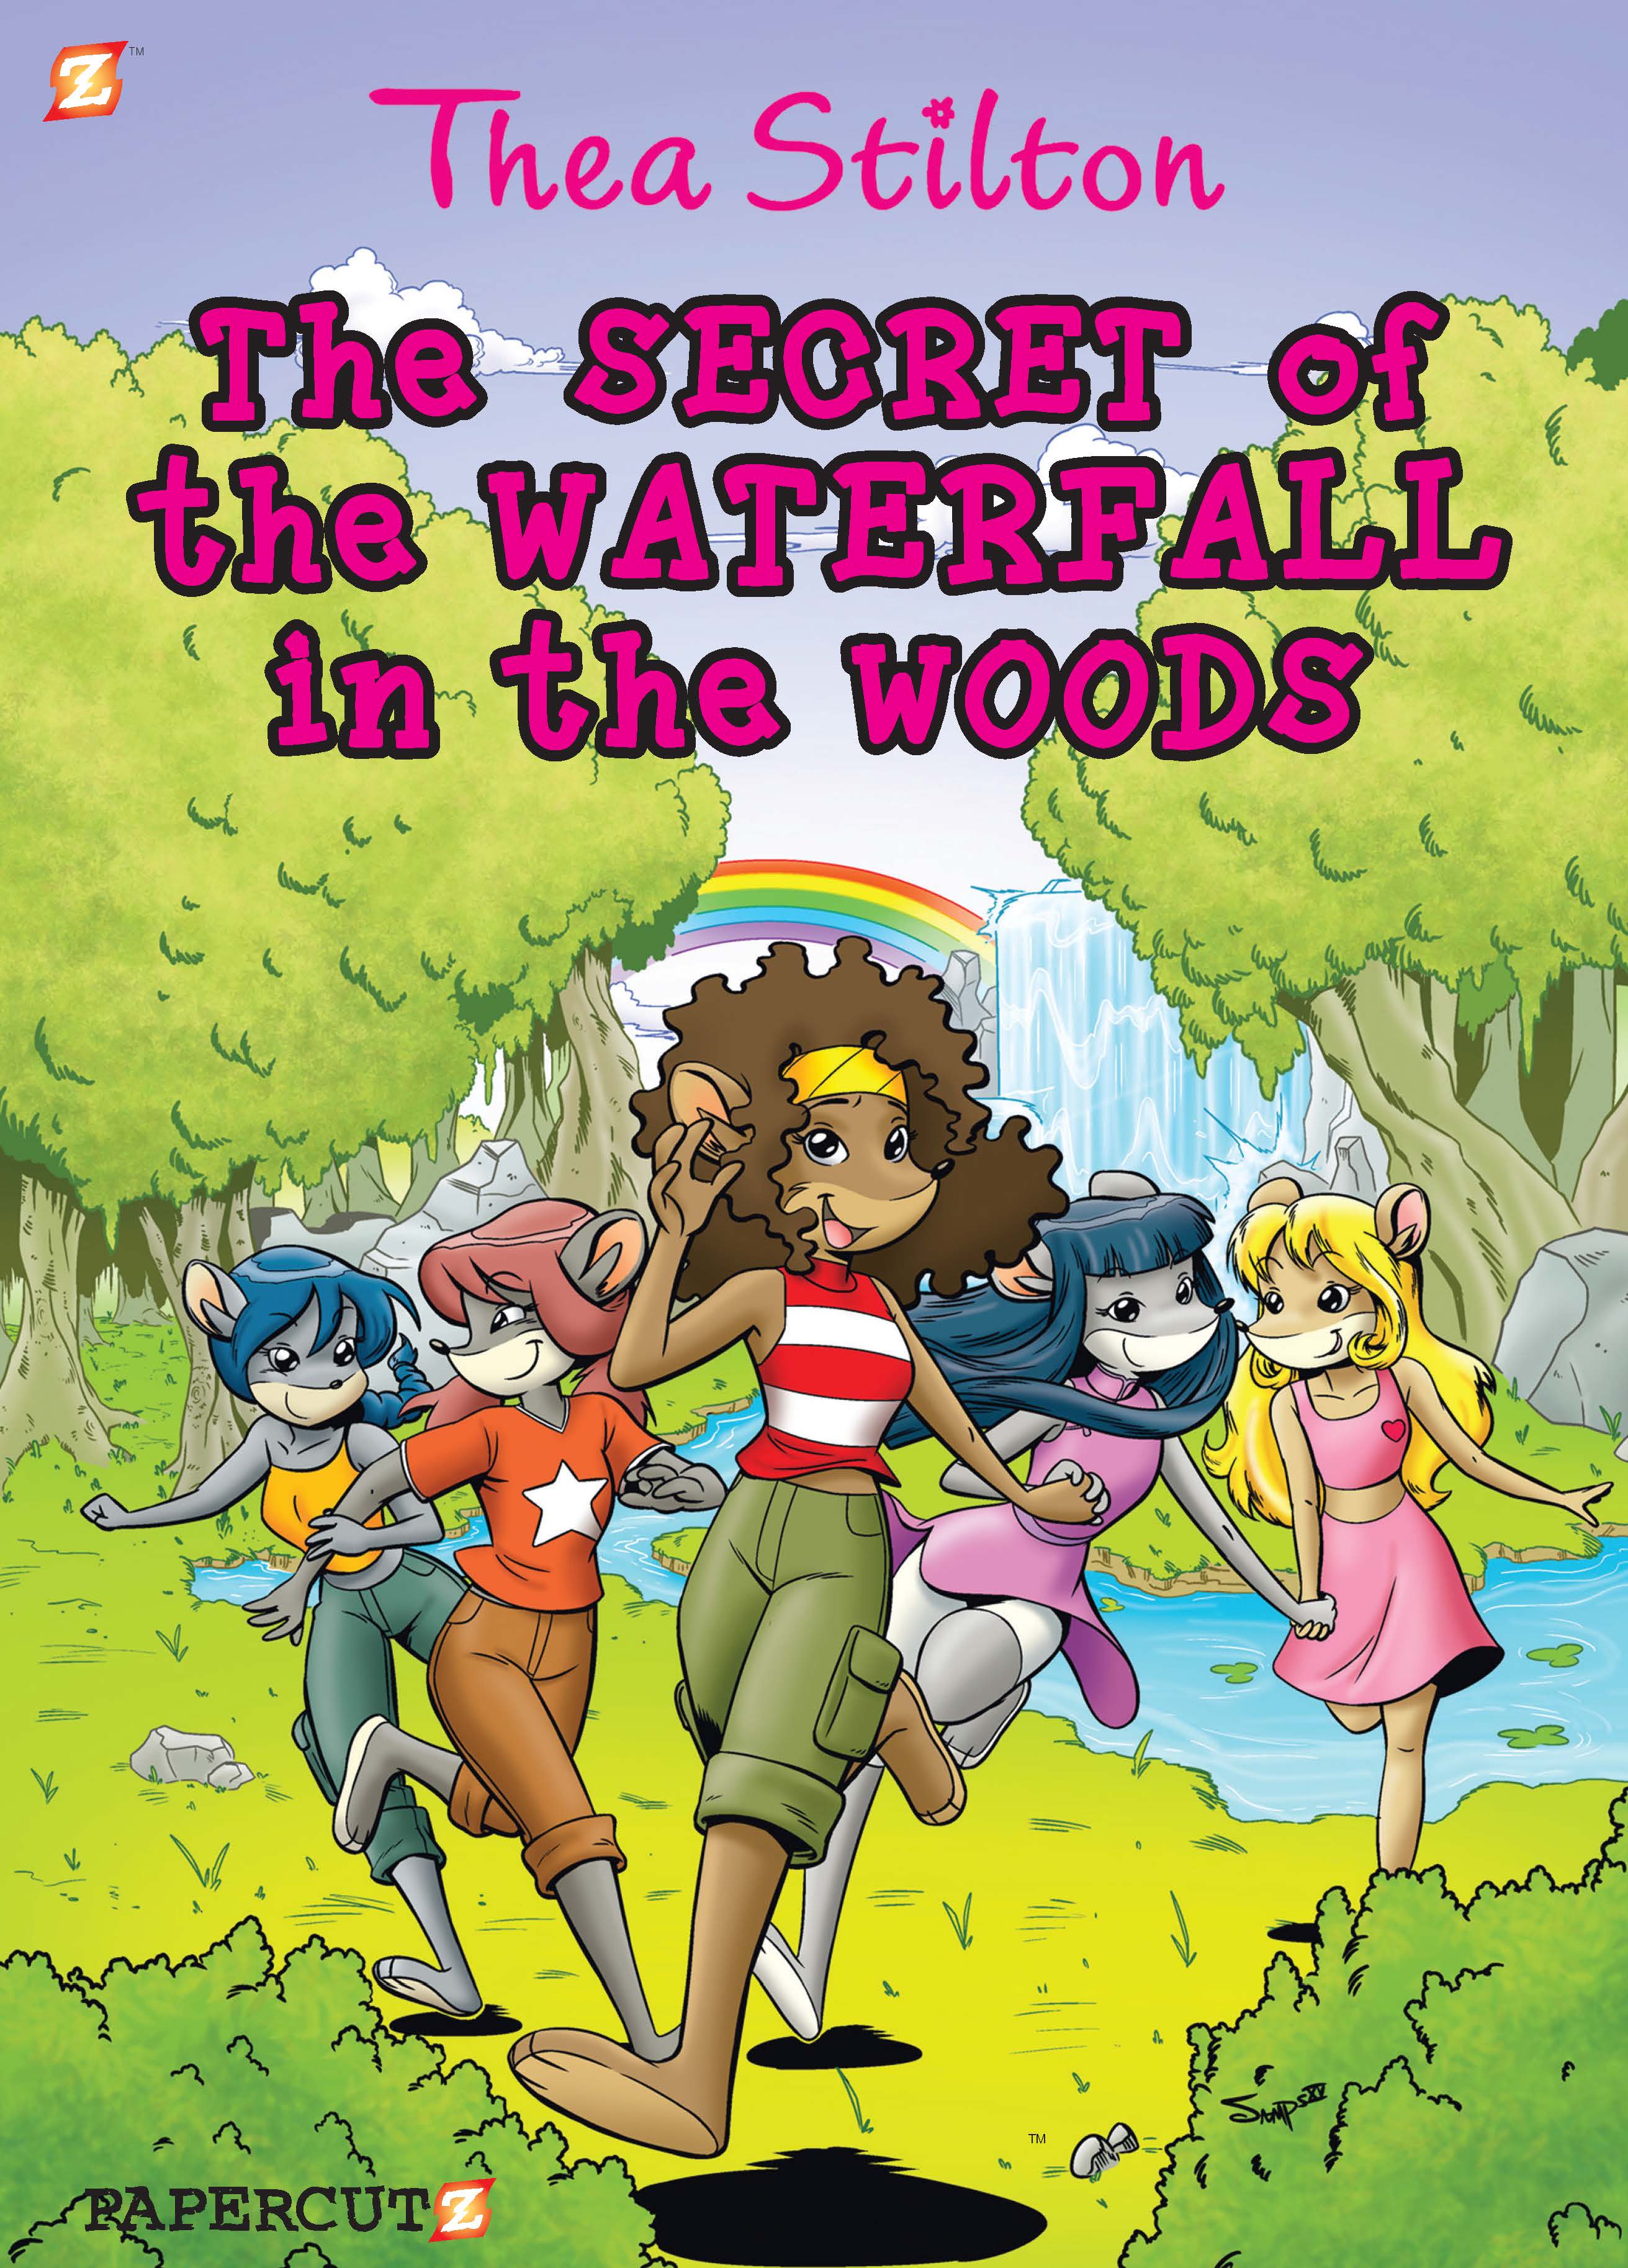 Thea Stilton #5: “The Secret of the Waterfall in the Woods”